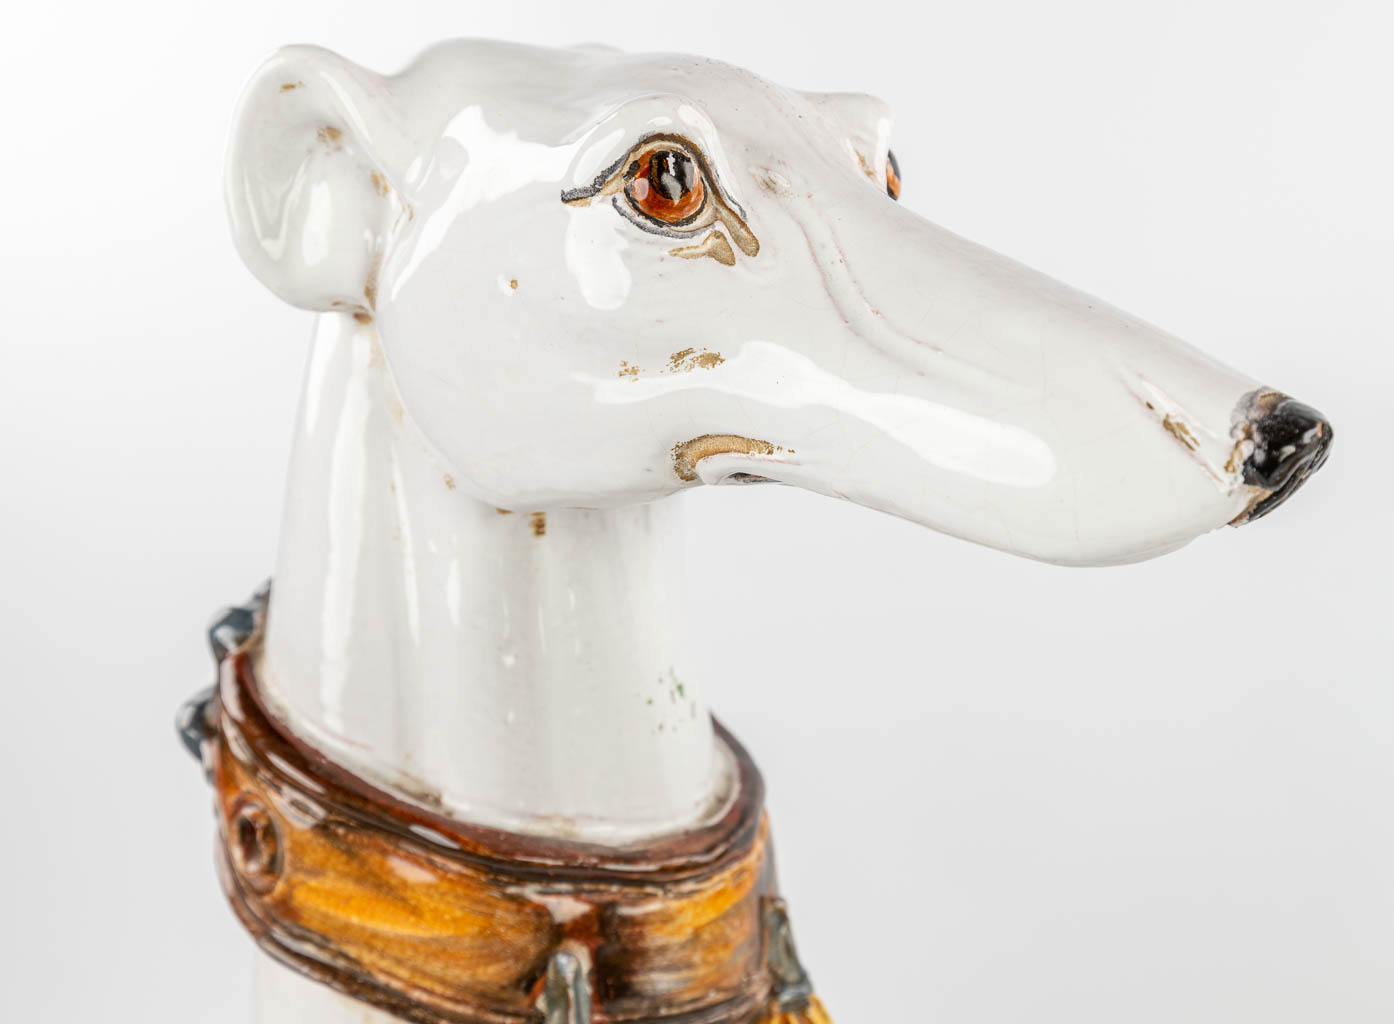 A pair of 2 mid-century greyhounds made of glazed terracotta, made in Italy. (H:67cm)